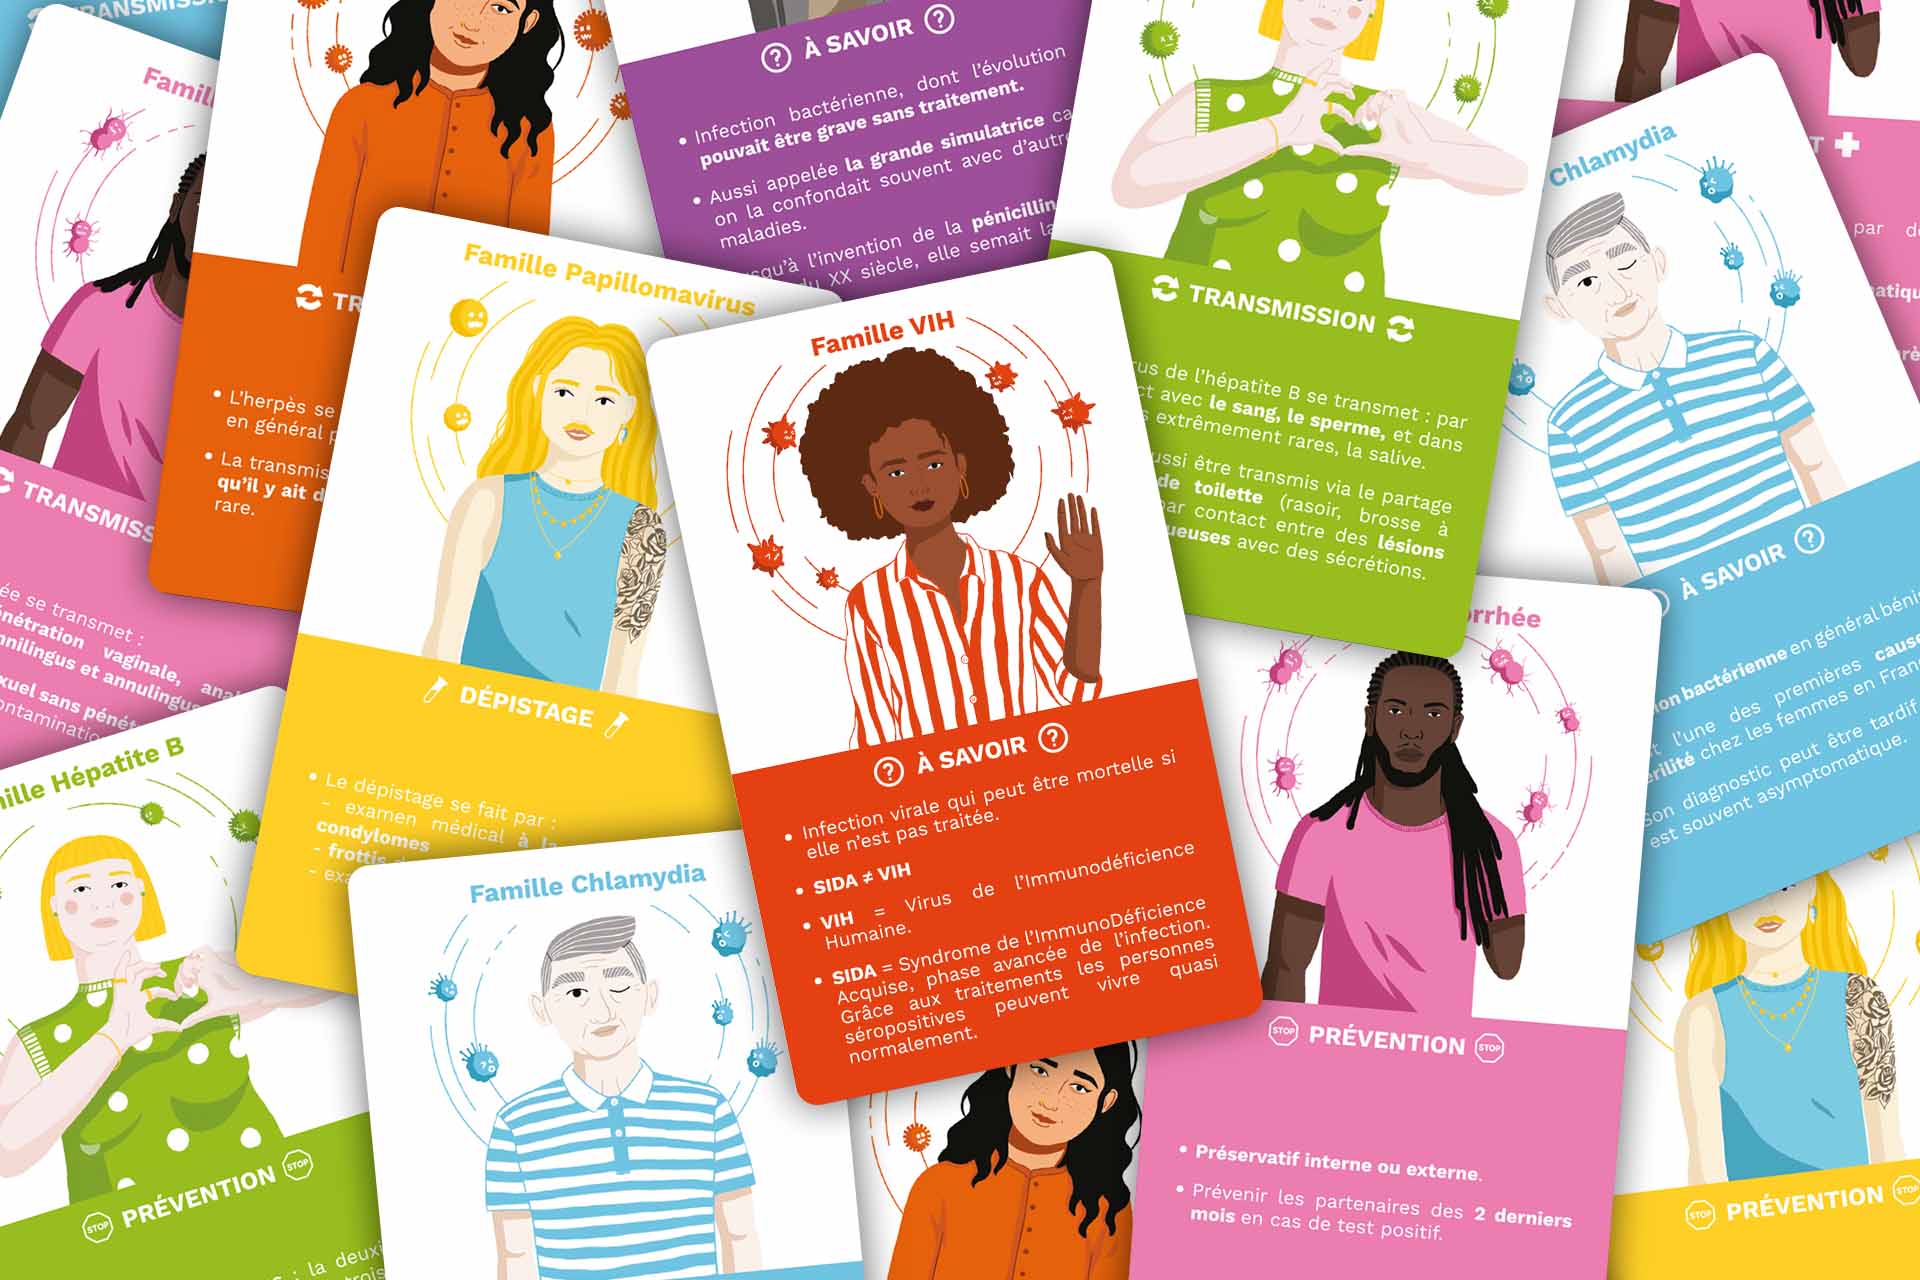 Cards of the seven families game on sexually transmitted infections, illustrated with inclusive characters and families of different infections.